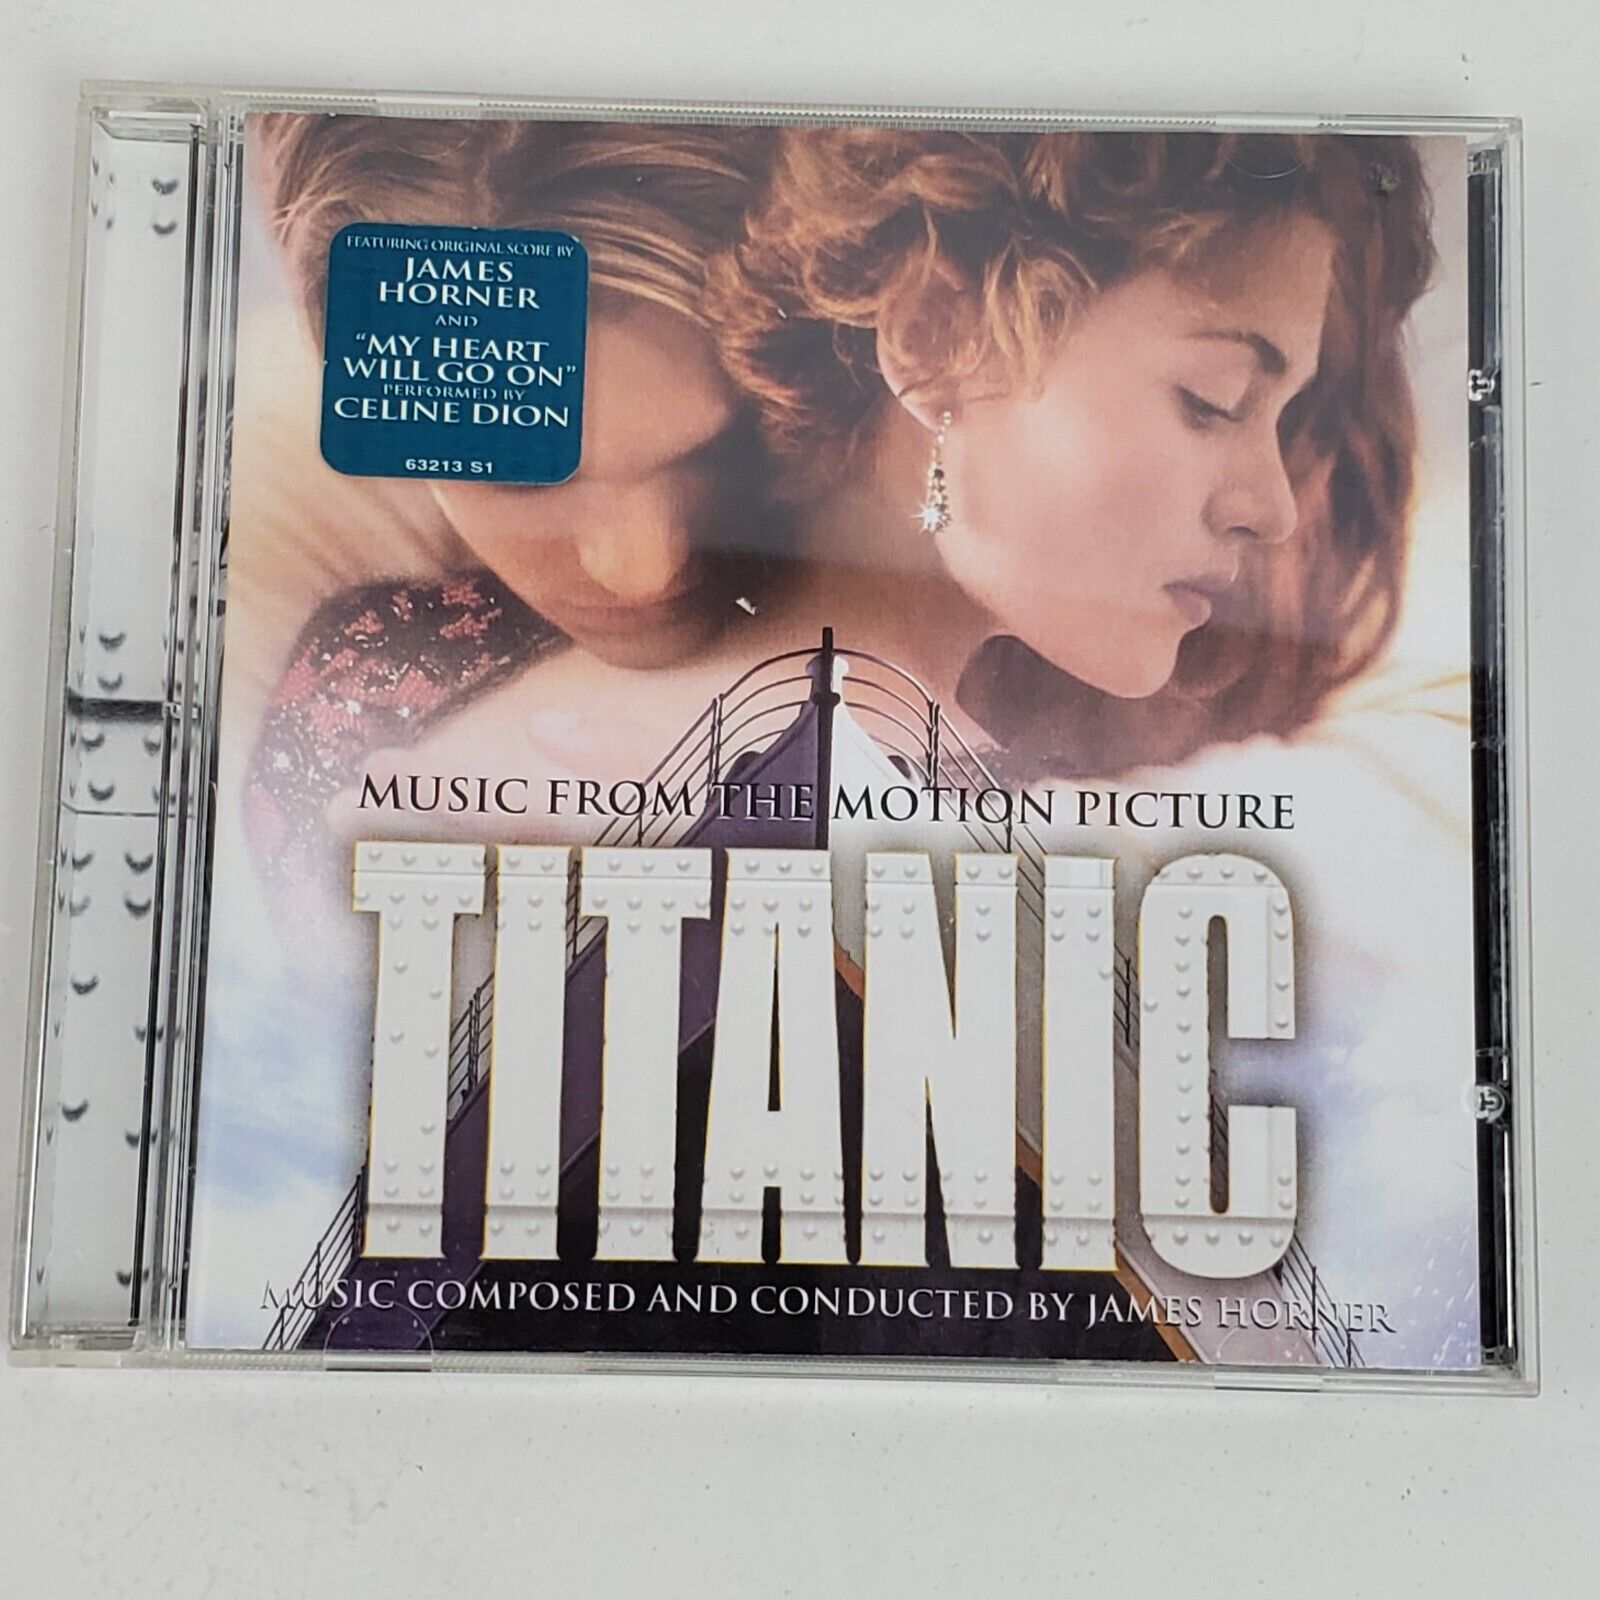 Vintage 1997 Titanic Motion Picture Music Music CD